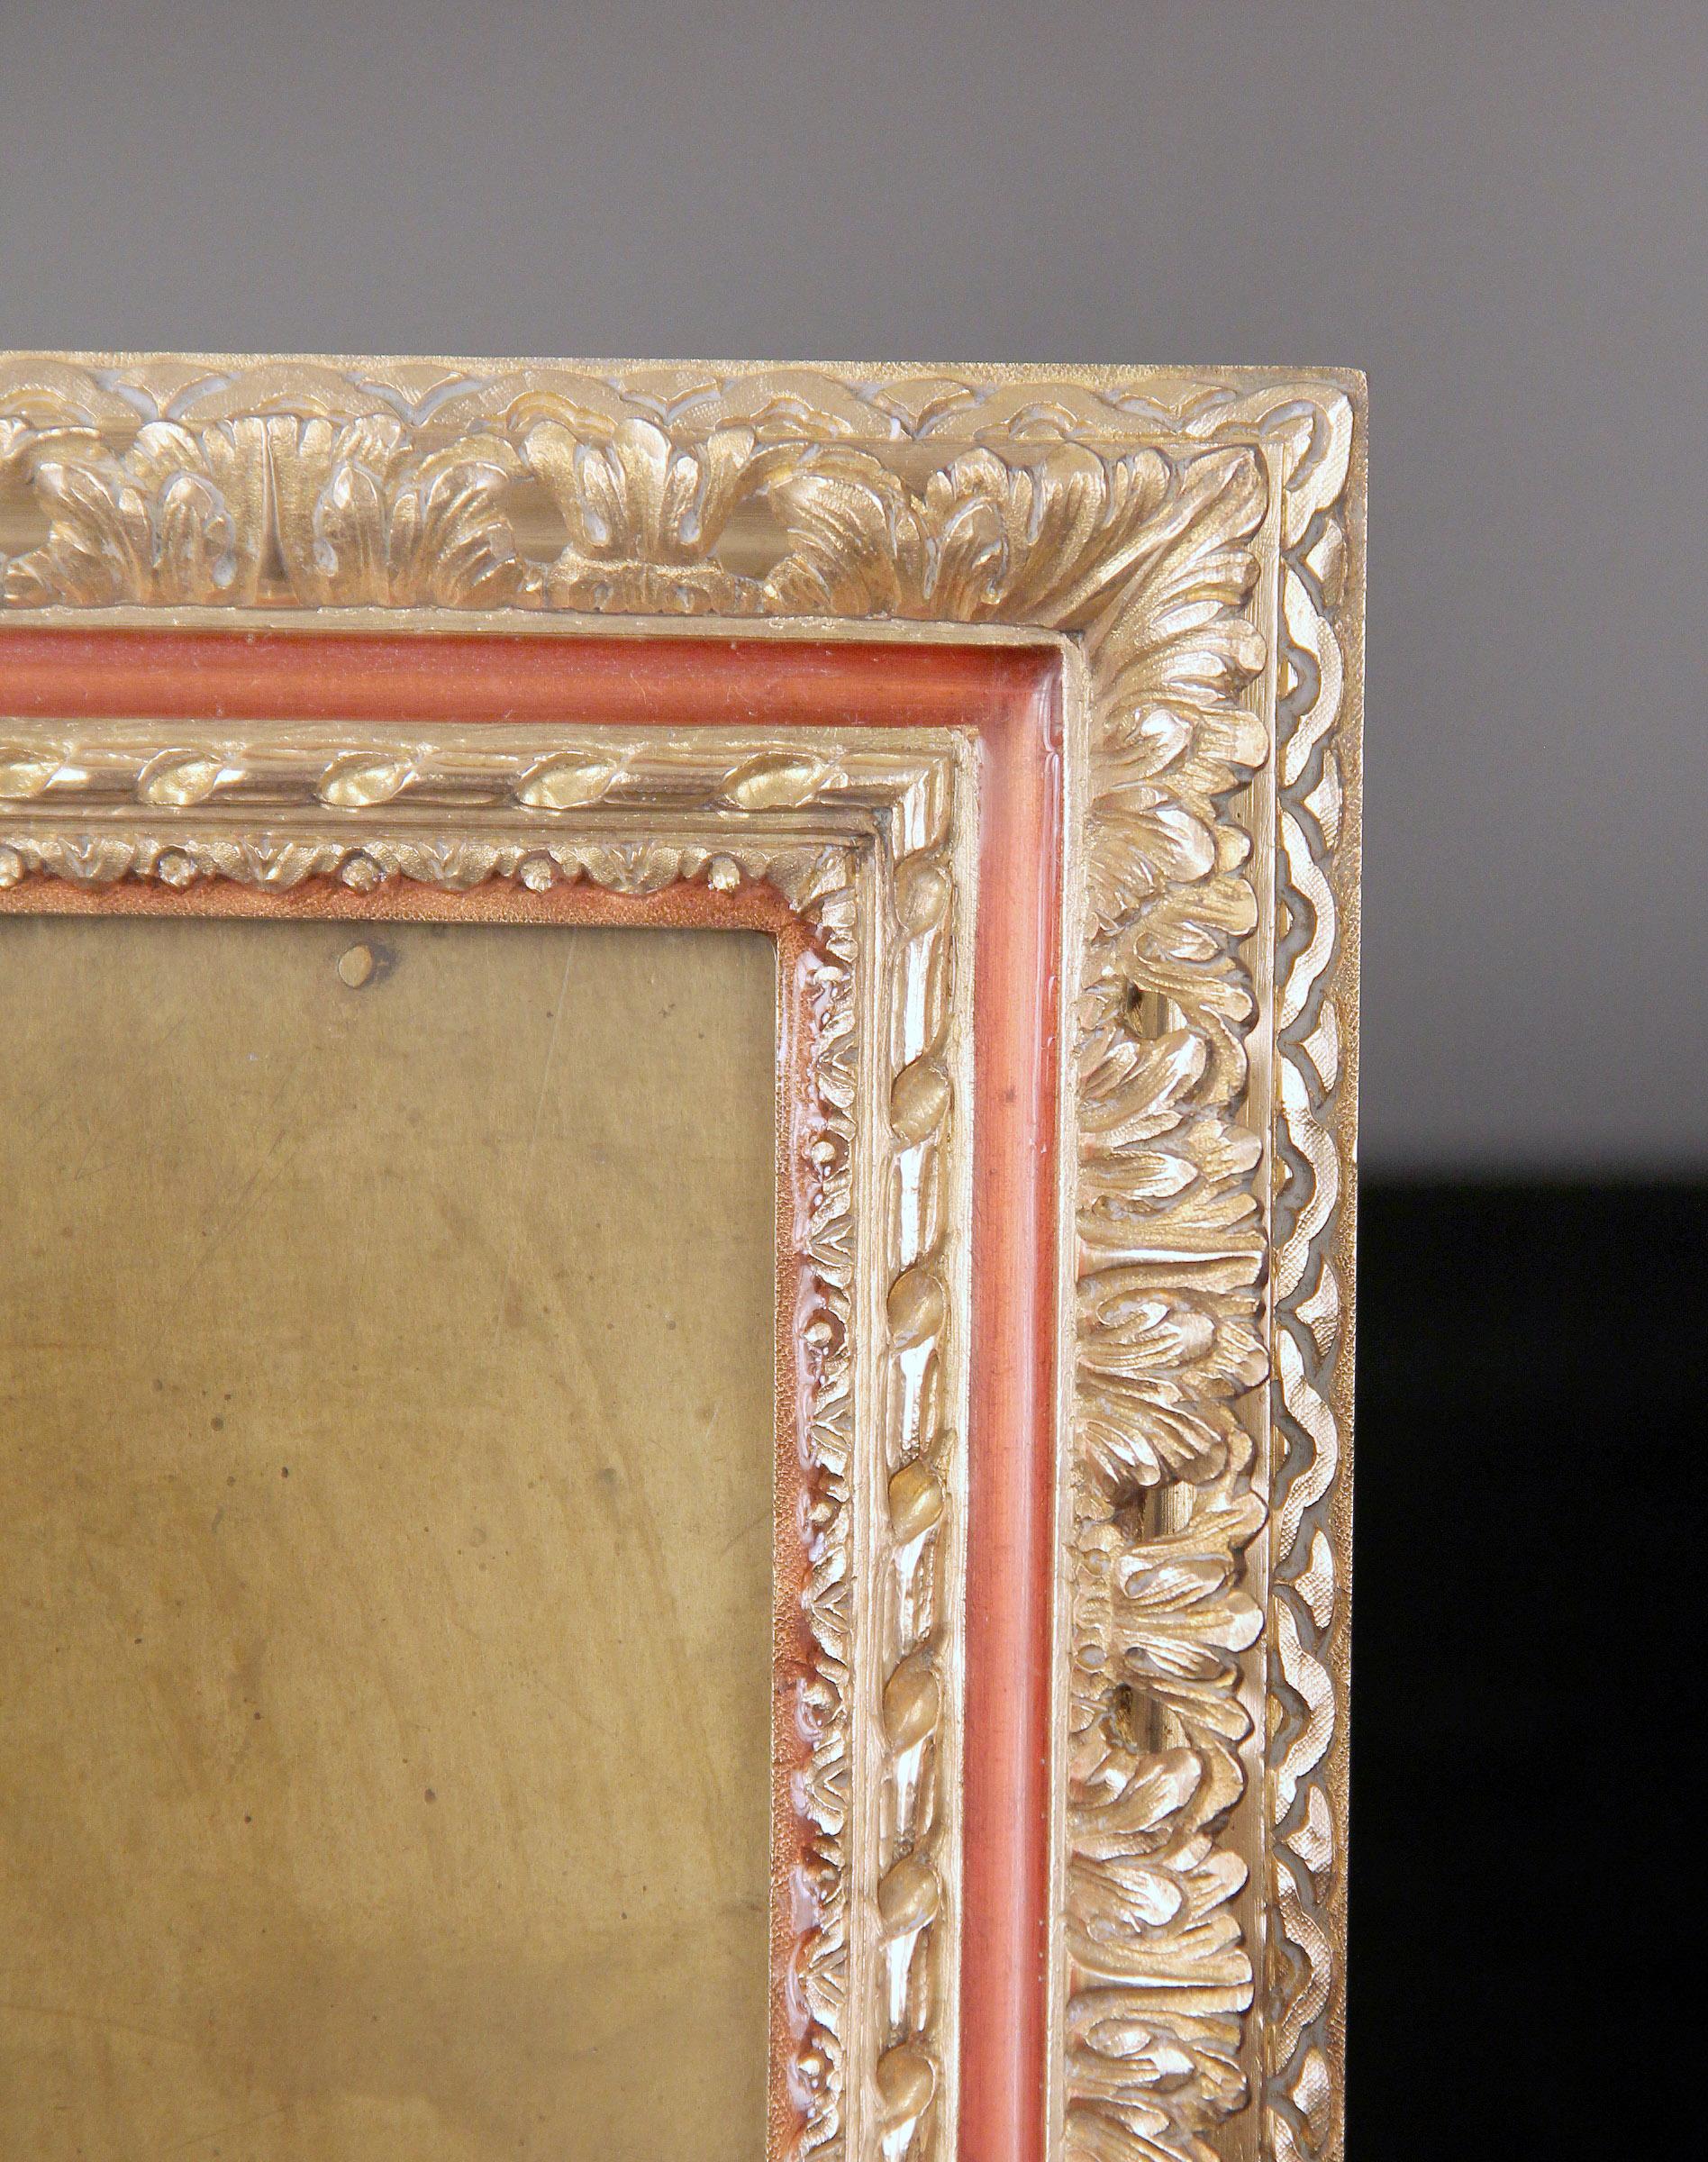 A very fine late 19th-early 20th century gilt bronze picture frame

By G. Vigneron

Signed G. Vigneron, 10 Rue Caumartin, Paris on the back of the frame.

Measures: Height 11 inches / 28cm
Width 8 inches / 20cm
Depth open: 10 inches / 25cm.